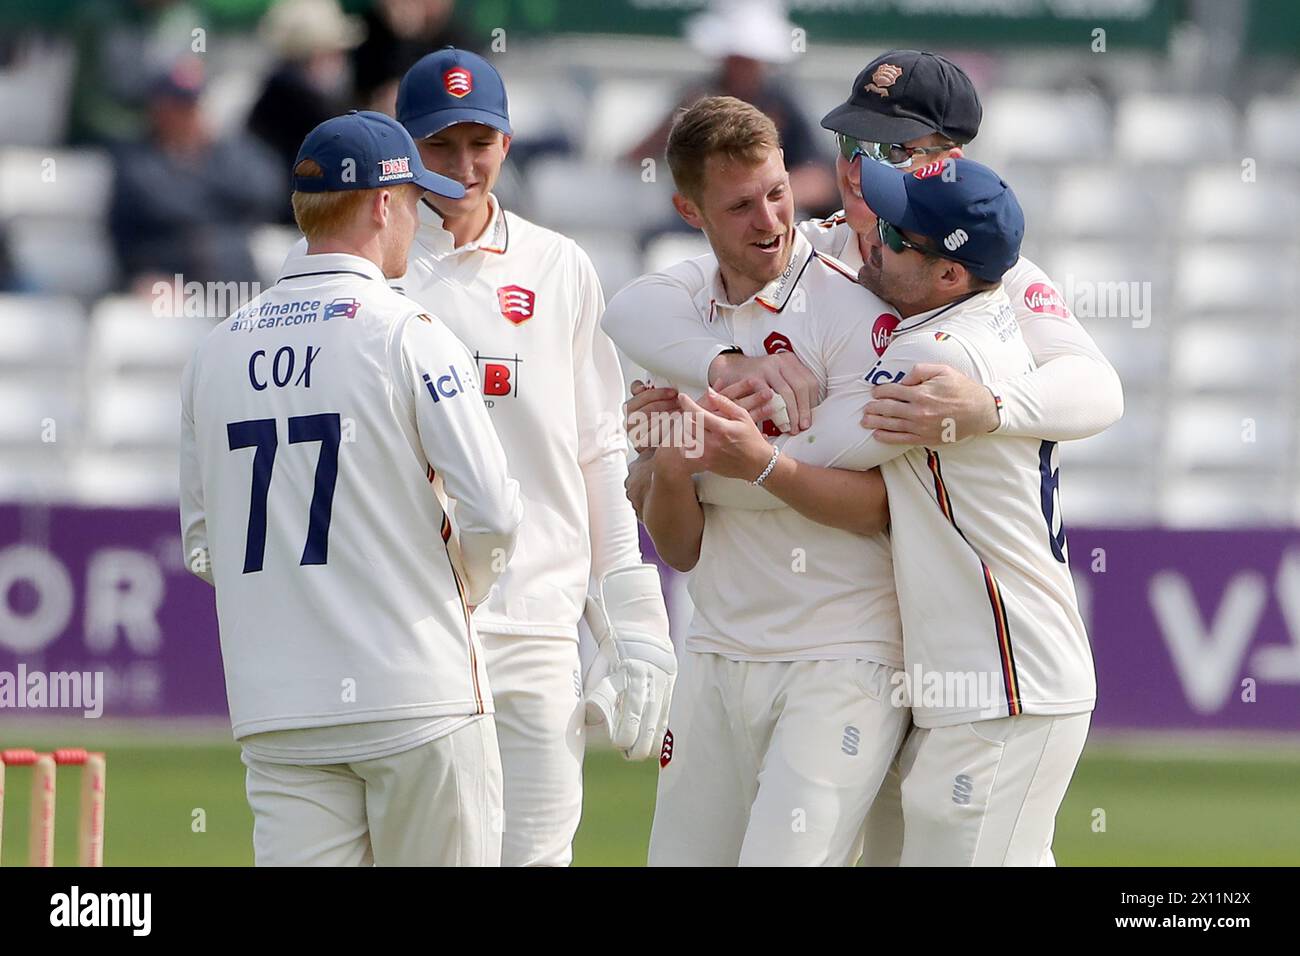 Jamie Porter of Essex celebrates taking the wicket of Daniel Bell-Drummond during Essex CCC vs Kent CCC, Vitality County Championship Division 1 Crick Stock Photo